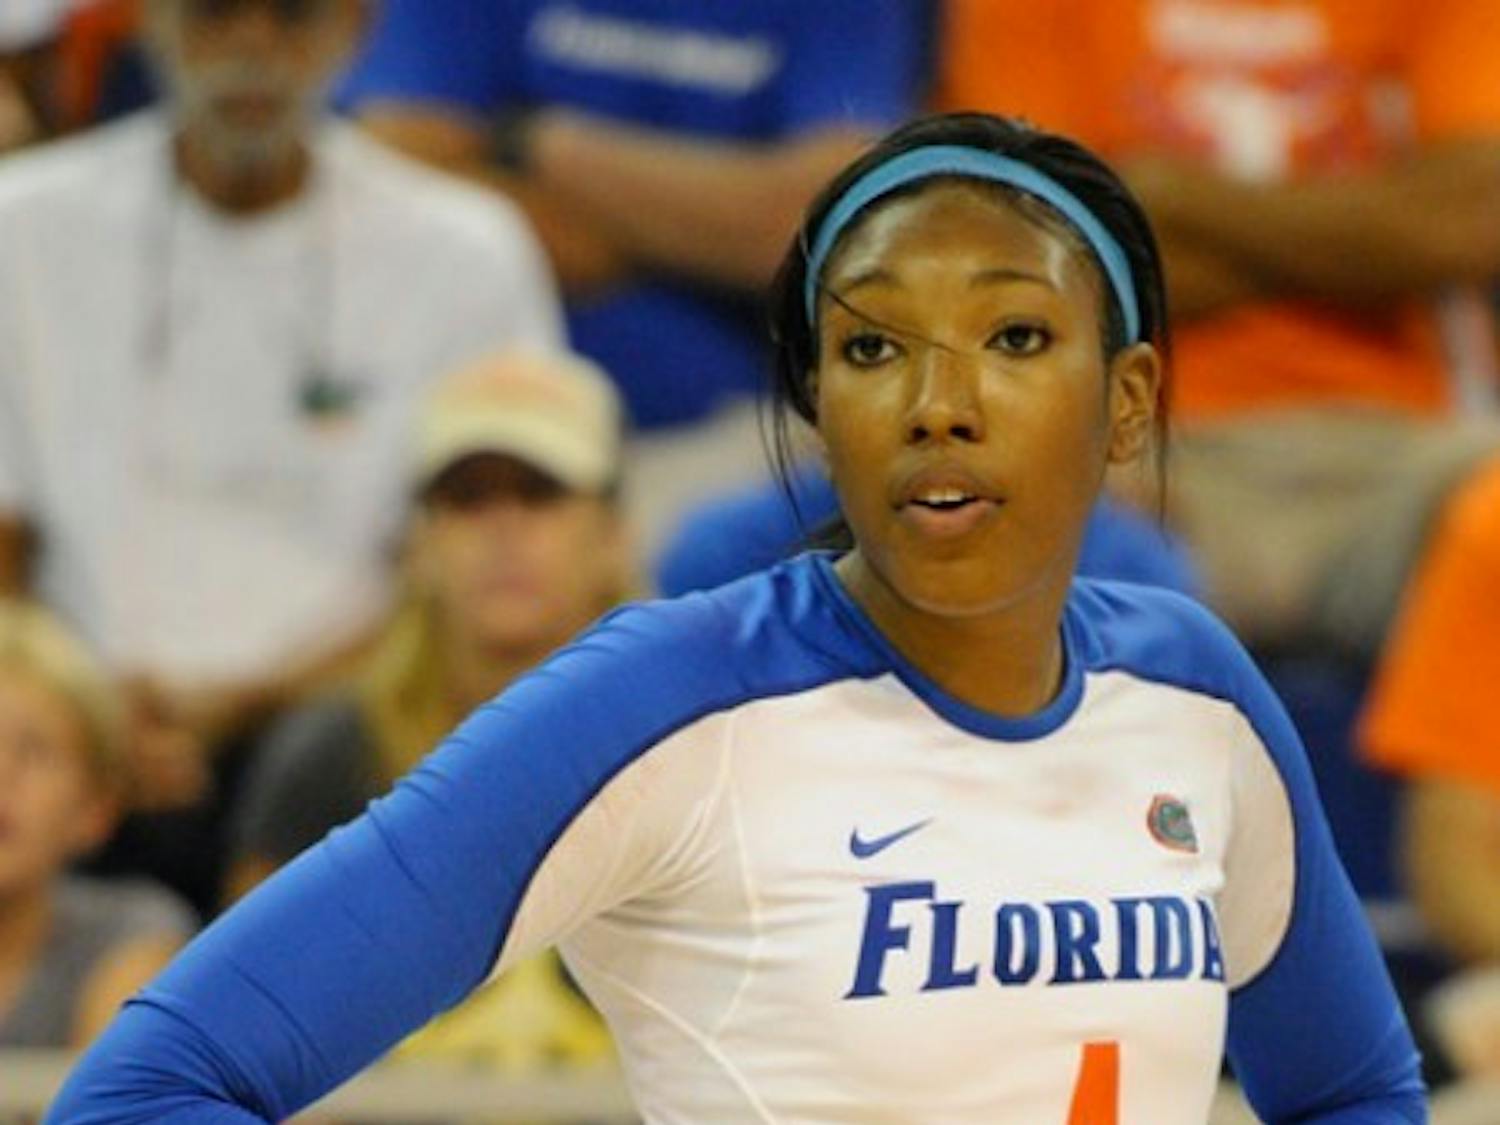 Senior right-side hitter Tangerine Wiggs recorded 31 total kills during the weekend, including a career-high 18 in a five-set loss to Stanford.